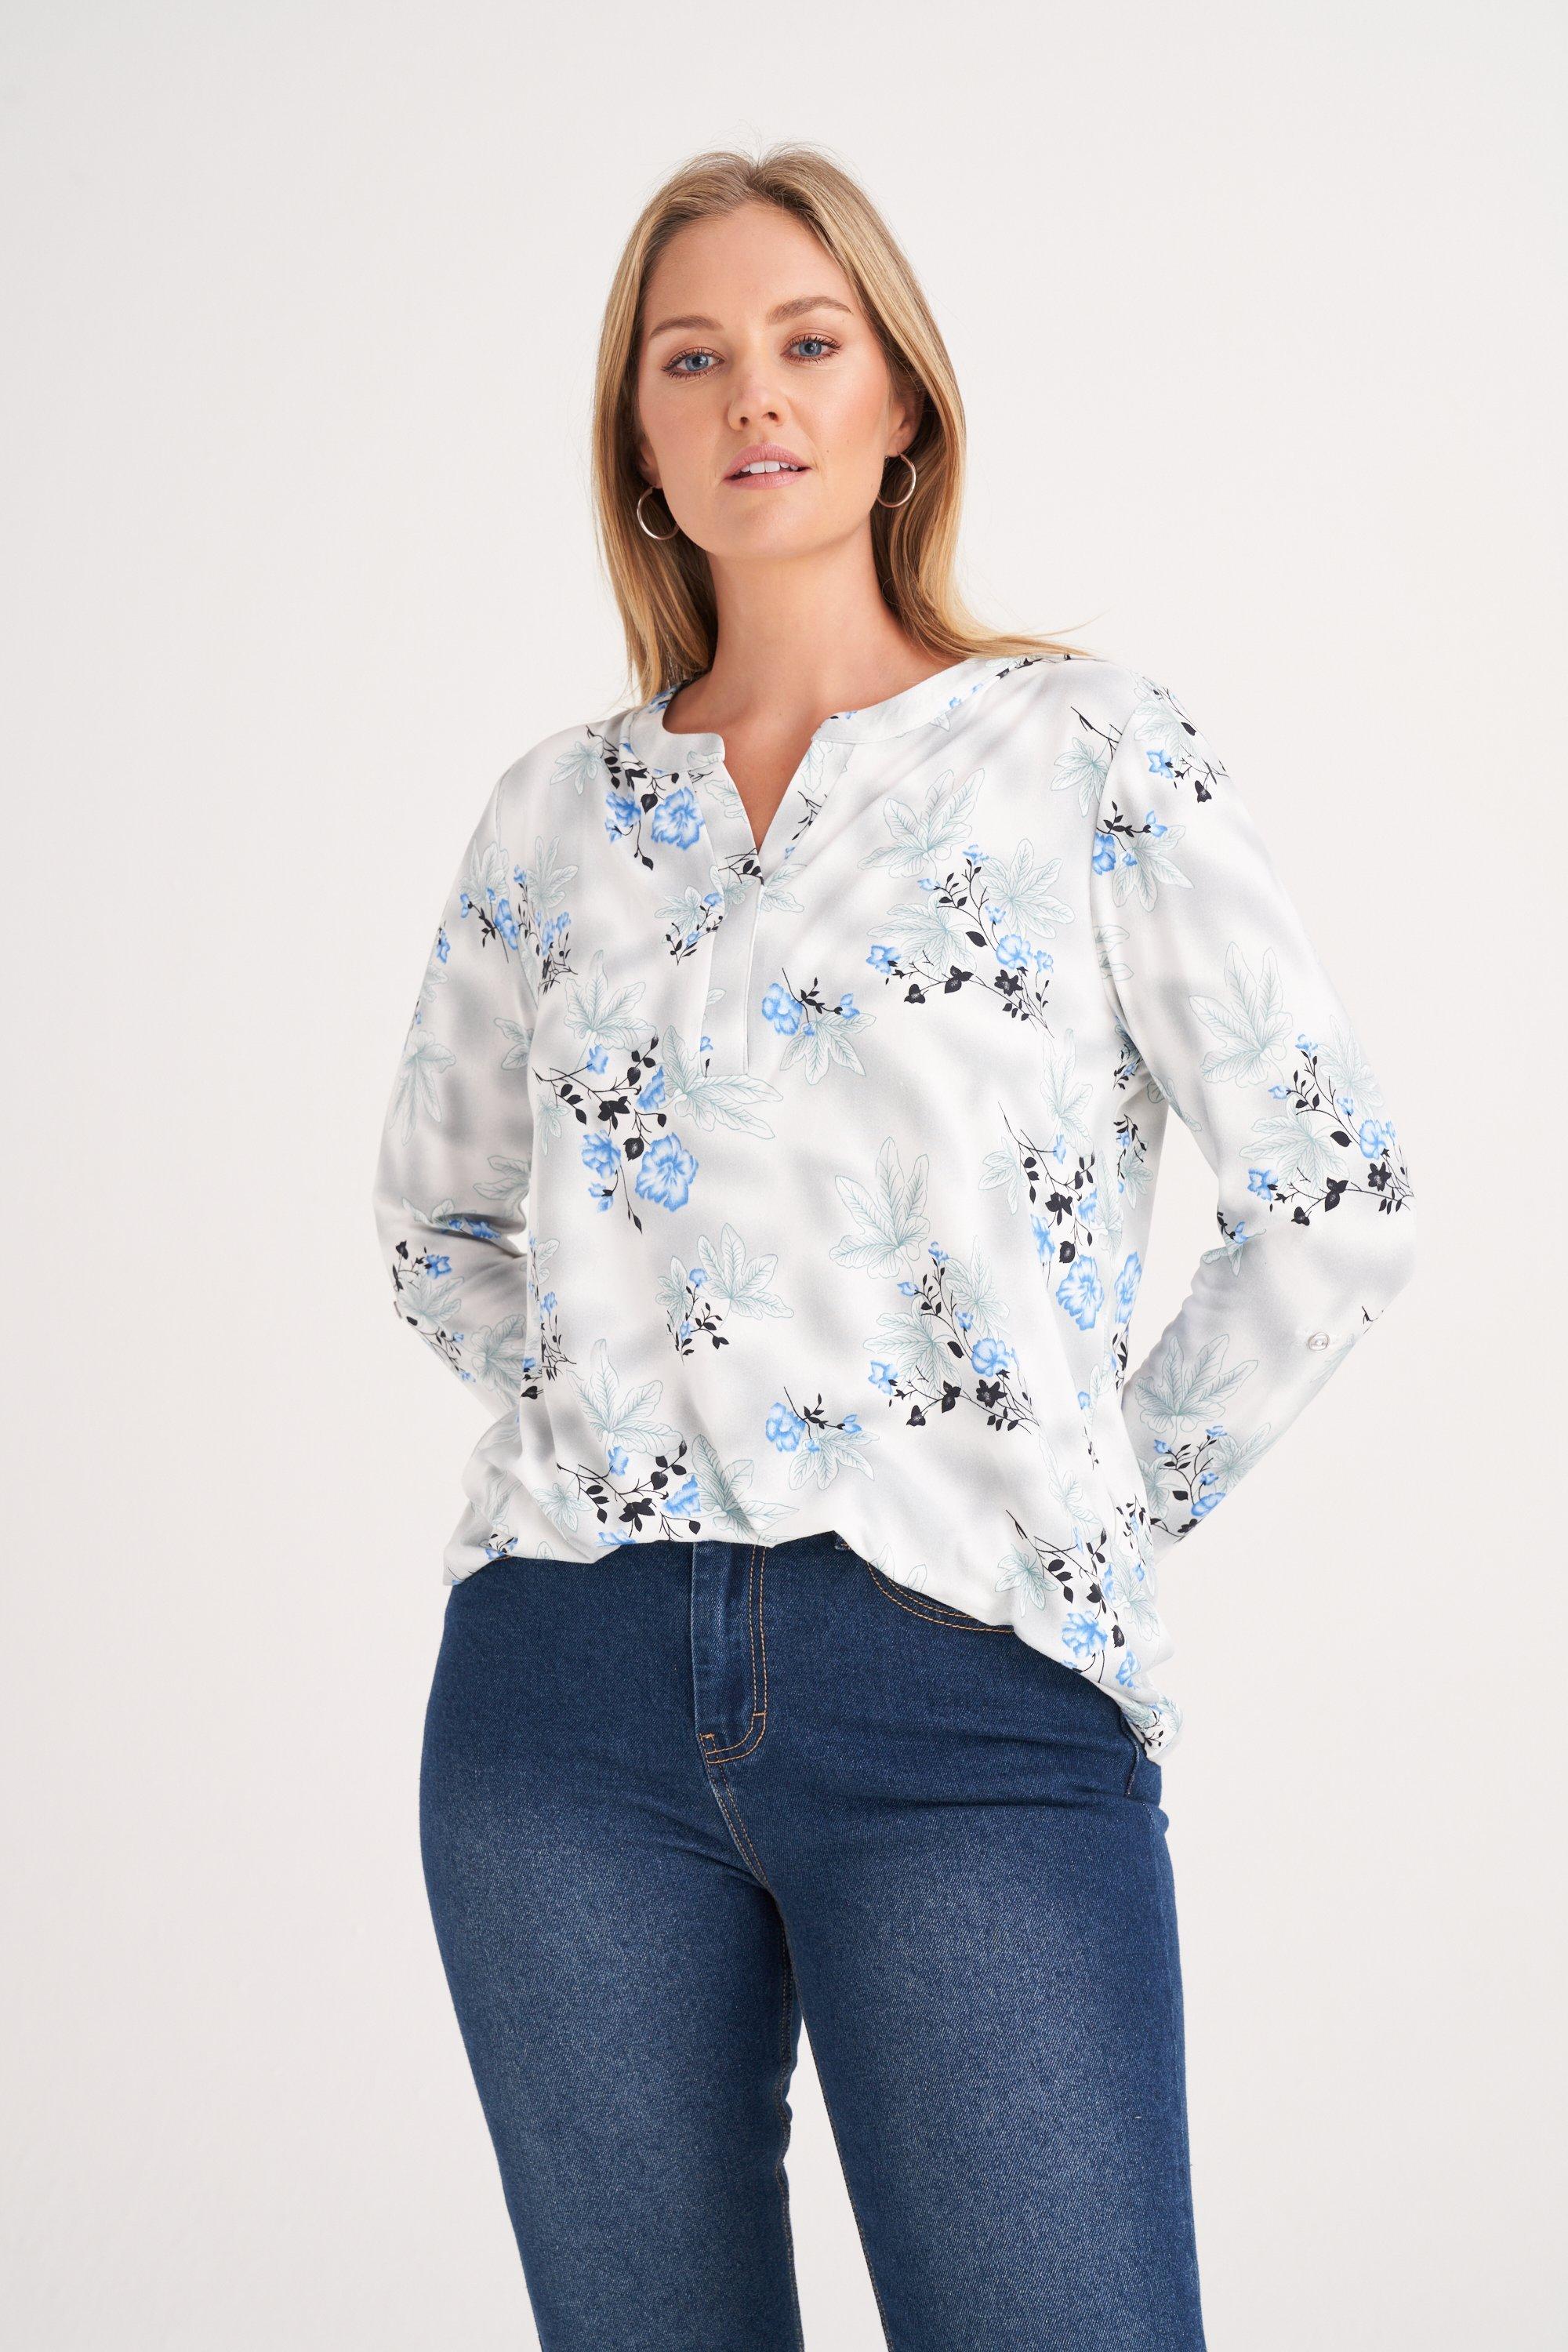 FLORAL PRINT HENLEY TOP